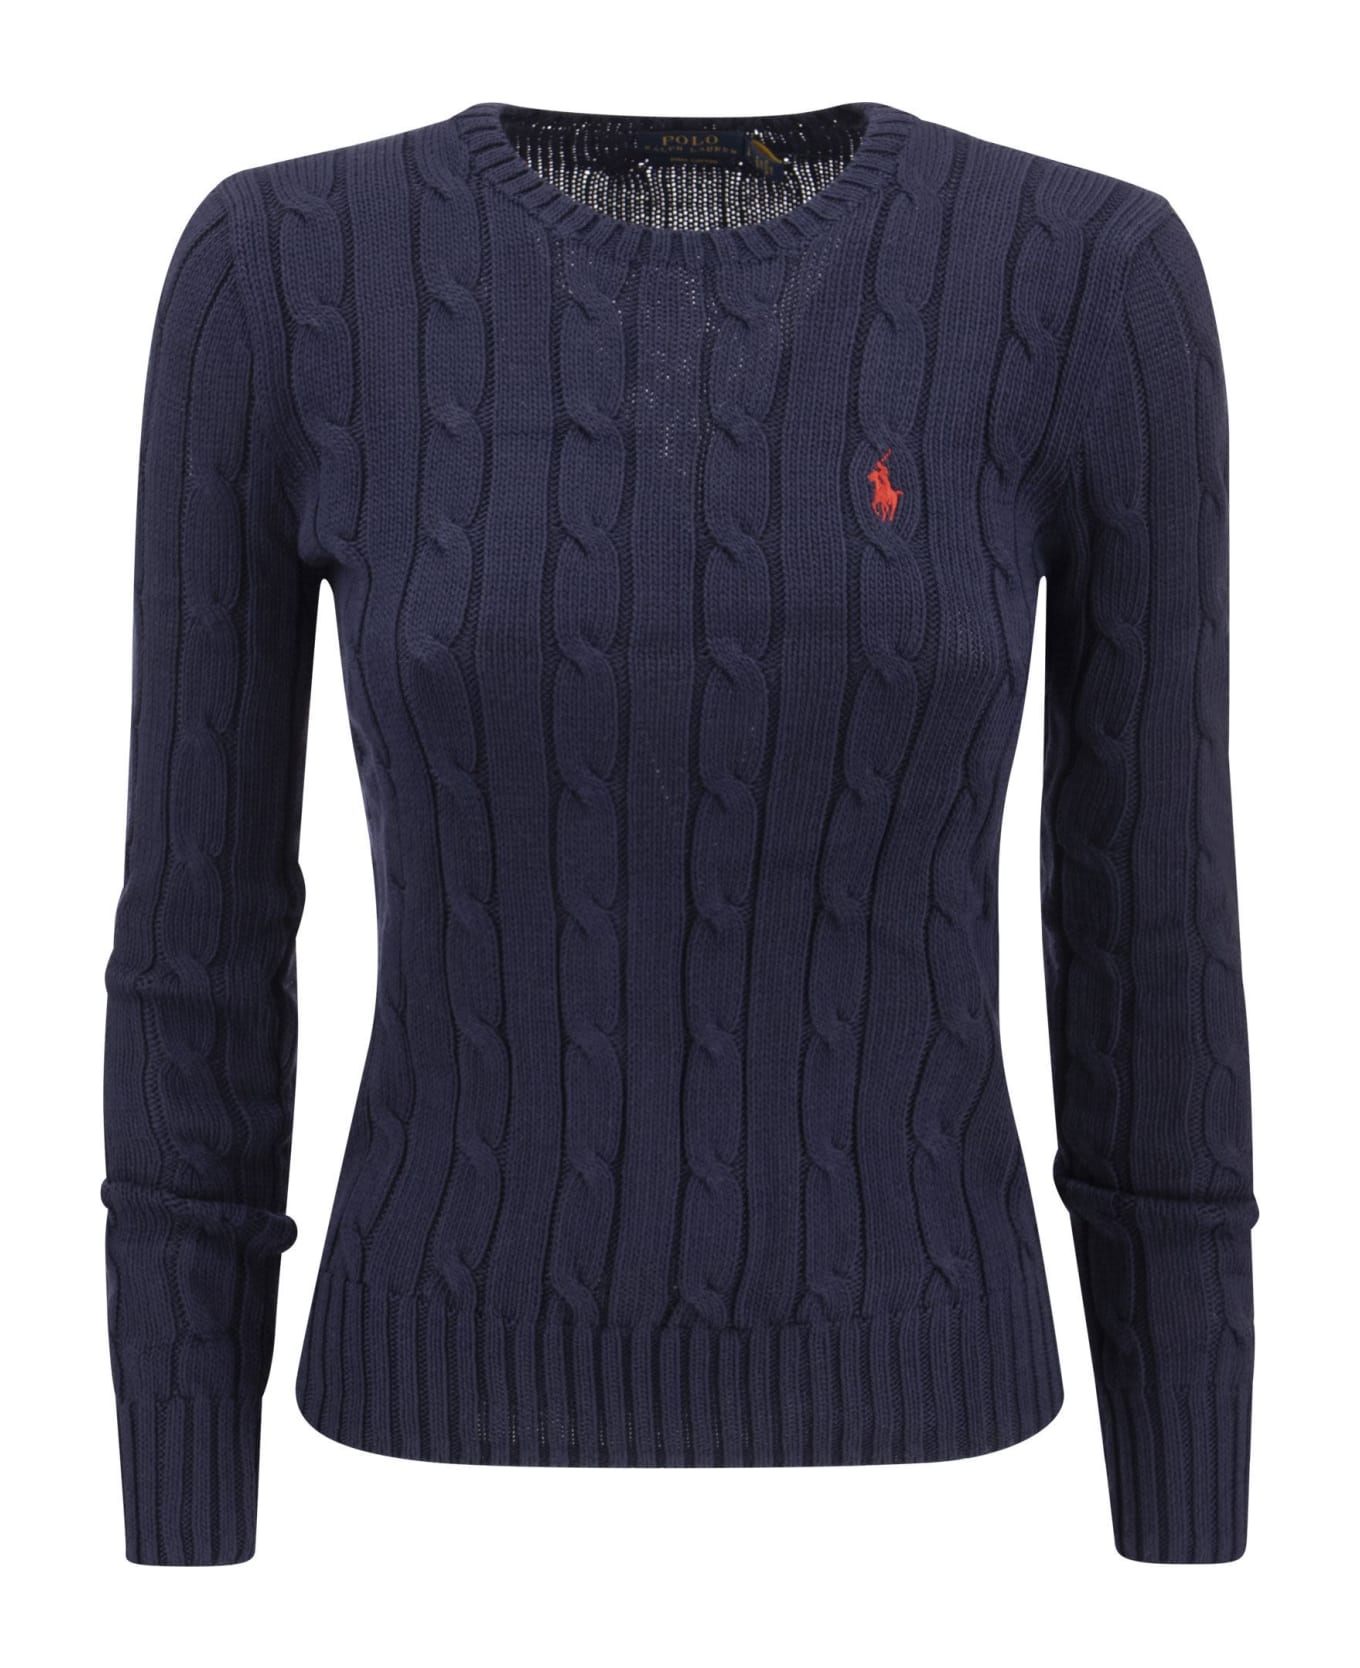 Polo Ralph Lauren Cable Knit Sweater - Navy Blue